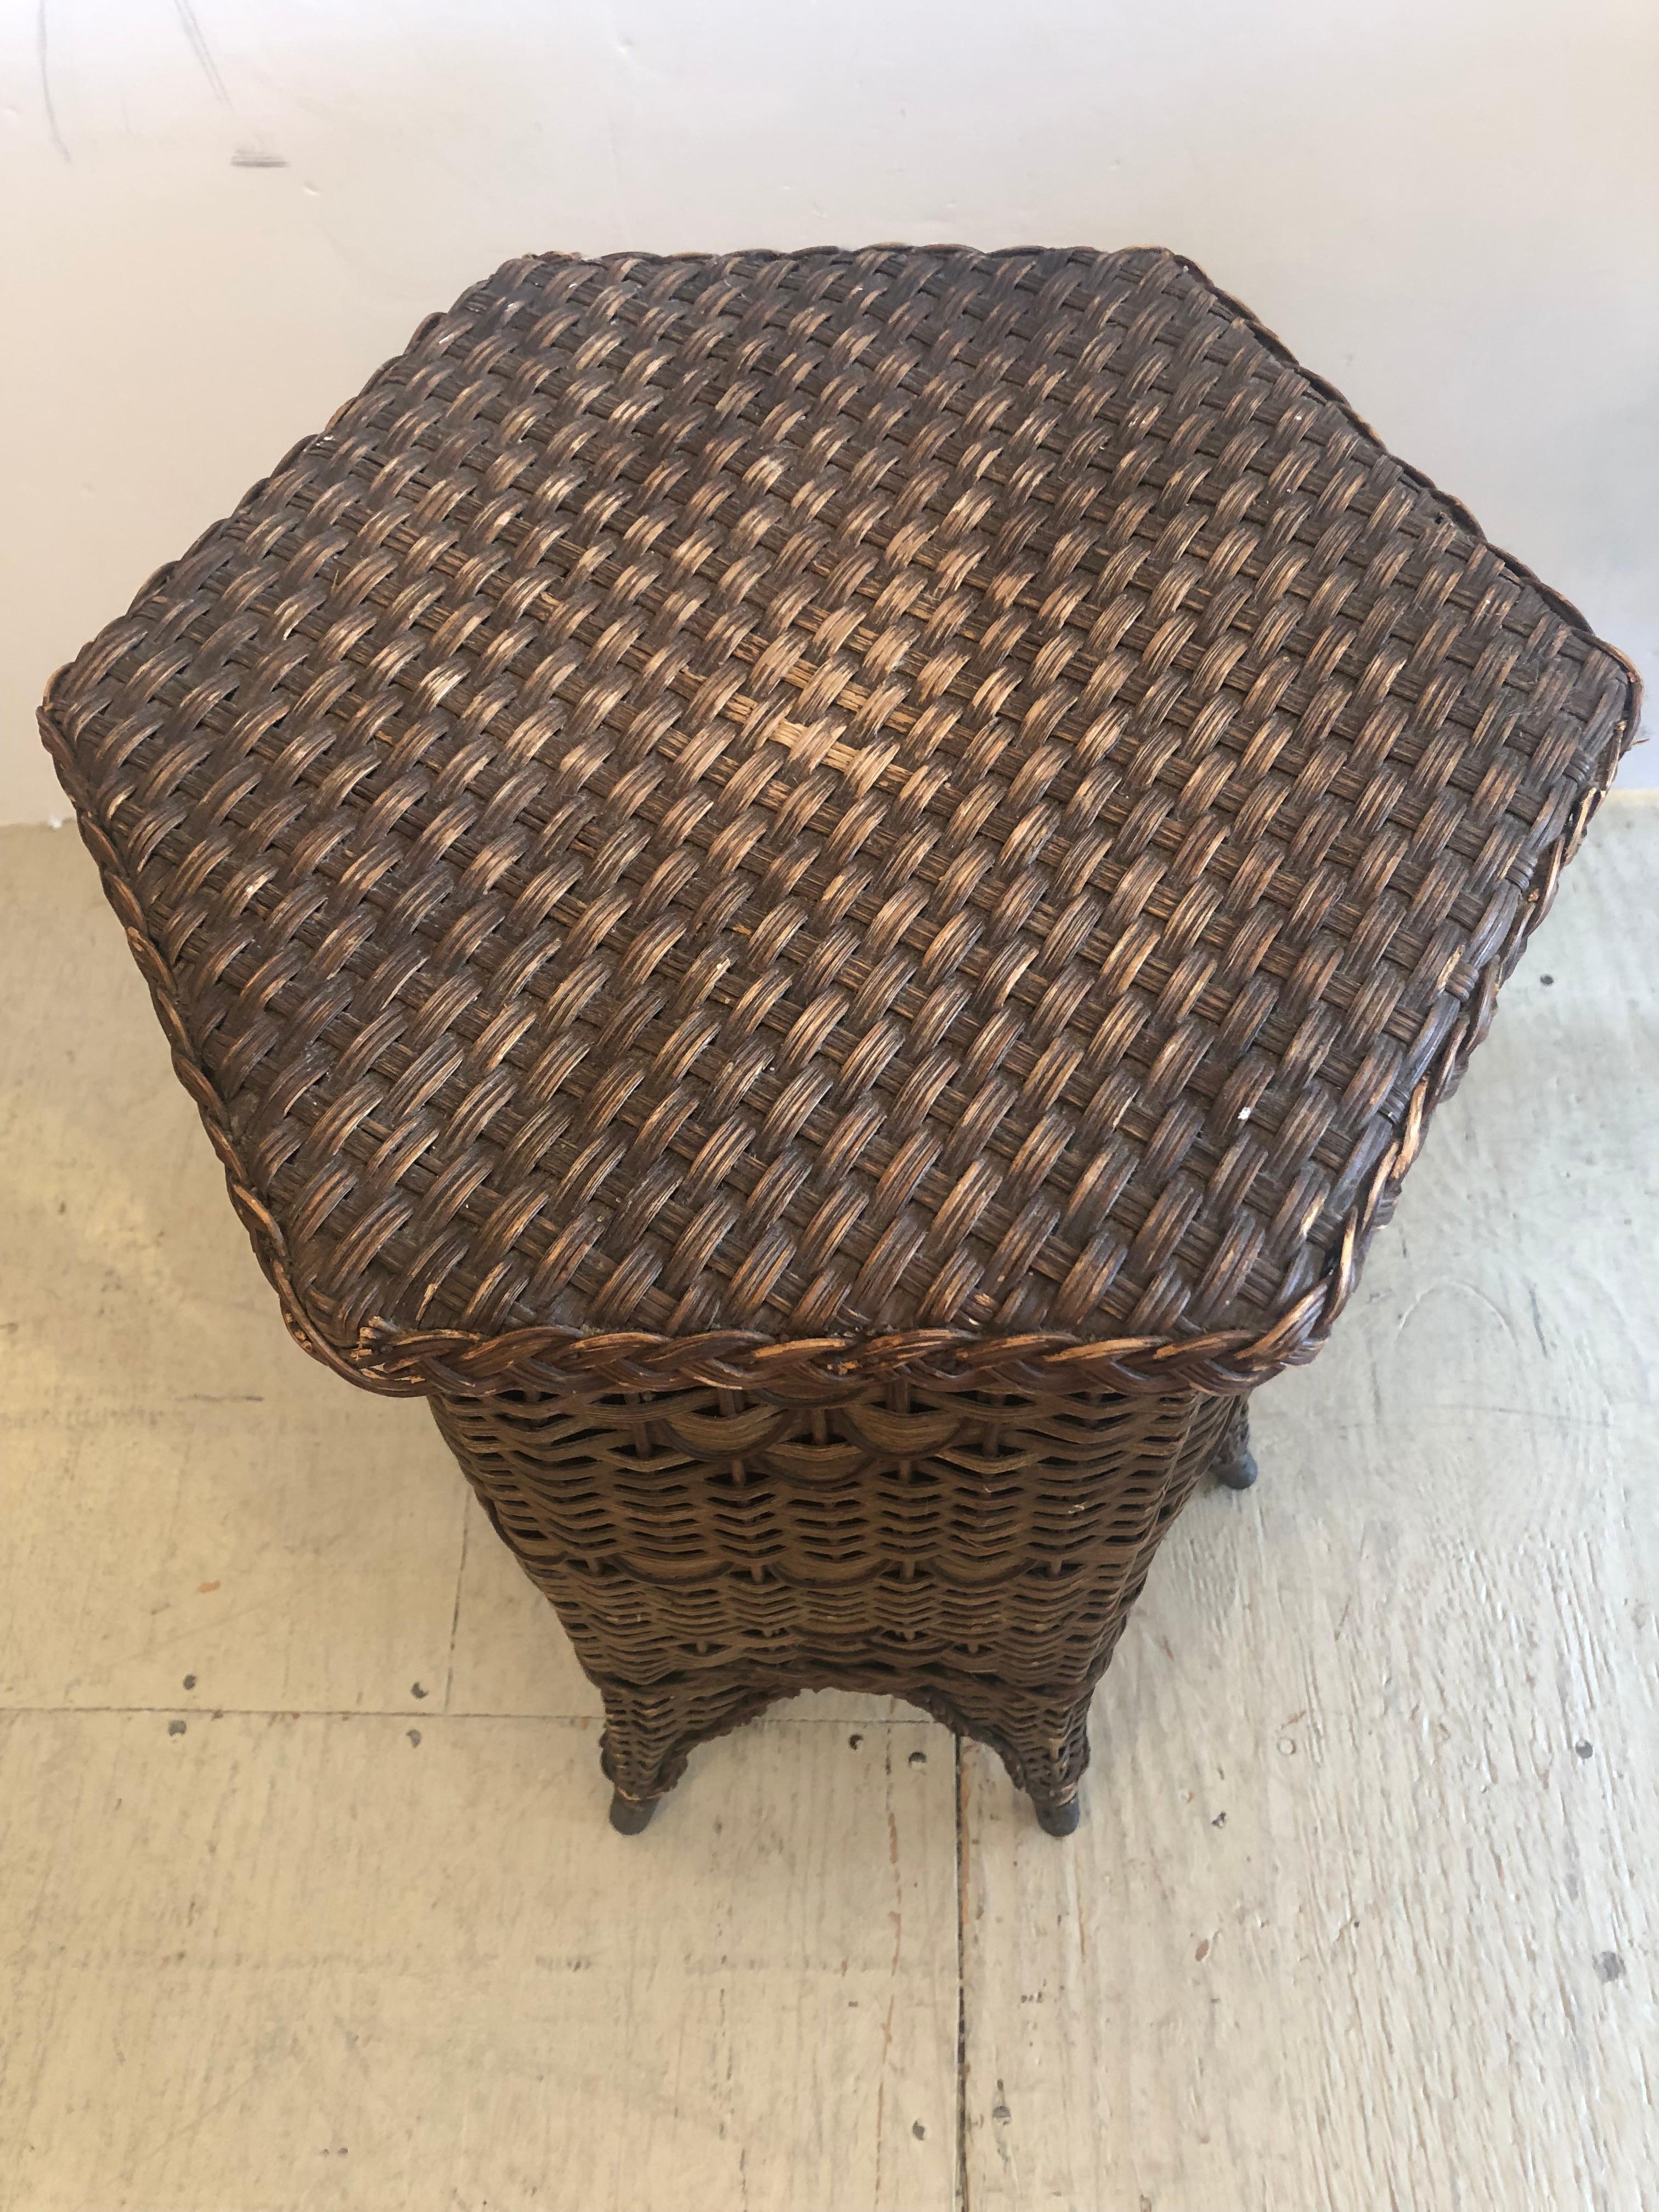 They don't make 'em like this anymore is a great way to describe this charming circa 1900 natural wicker and rattan hexagonal shaped drinks or end  side table having single door with storage inside. The adorable splayed feet are metal capped.